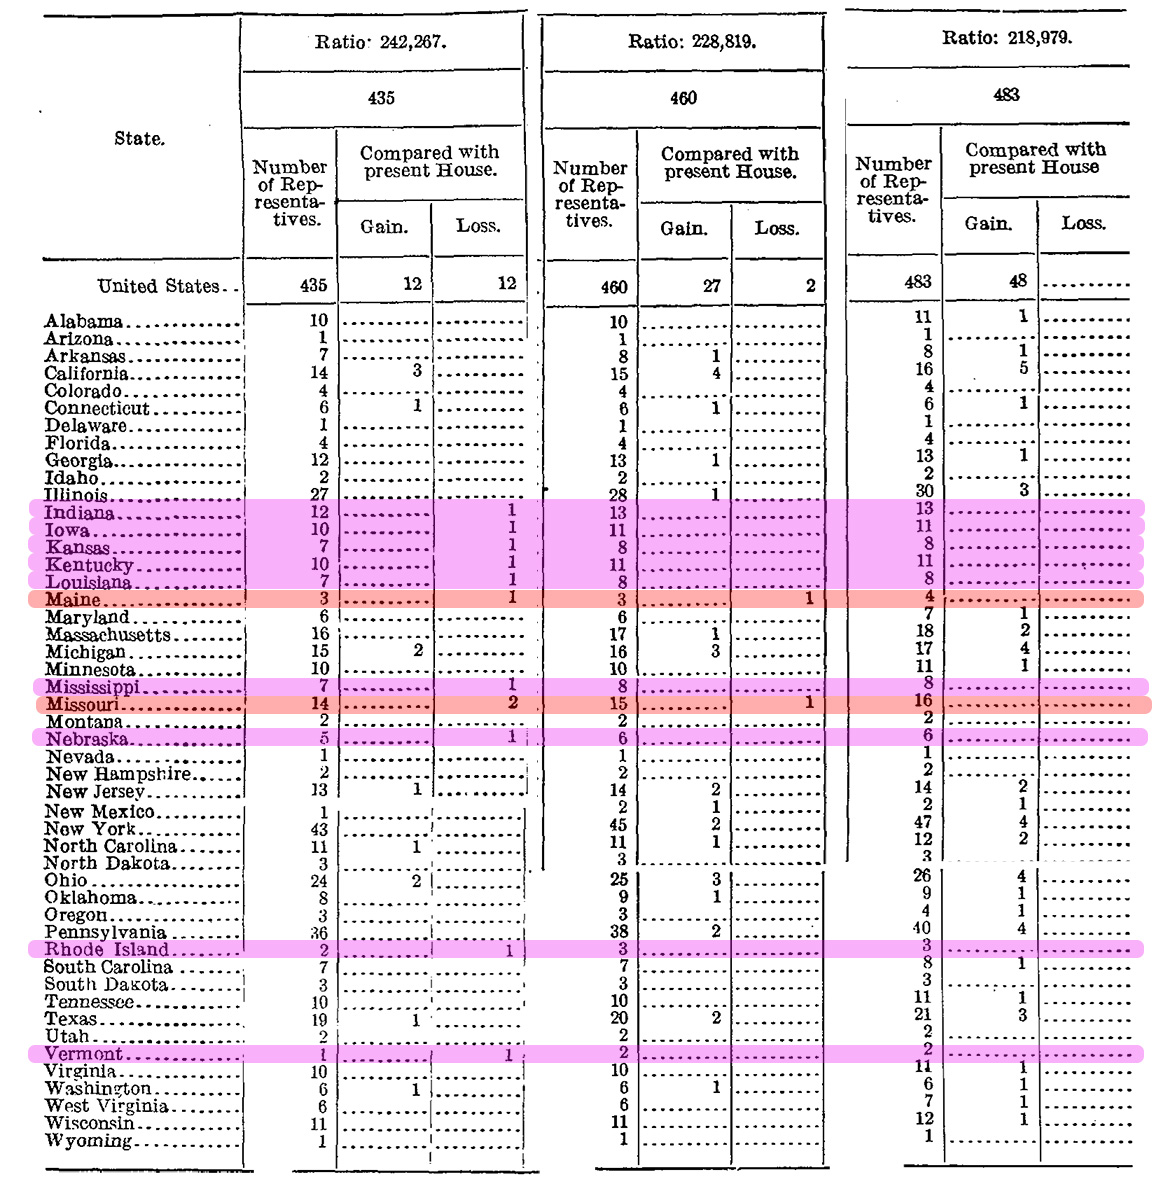 tables showing the number of representatives gained or lost by each state for various sizes of the House of Representatives